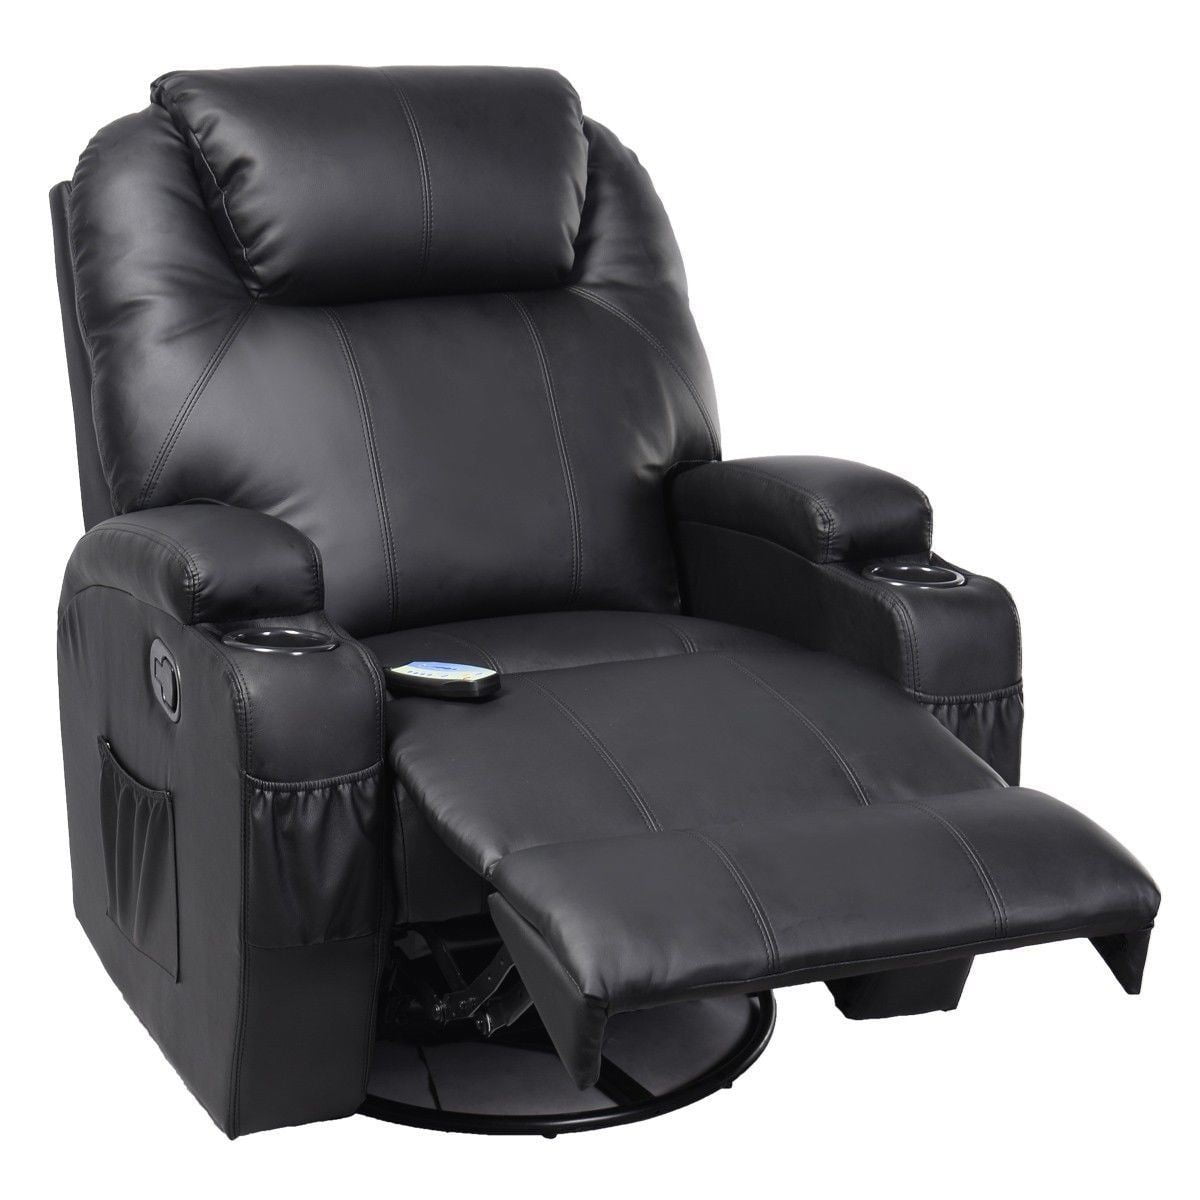 Recliner Massage Chair Deluxe with Heat and Control - Walmart.com